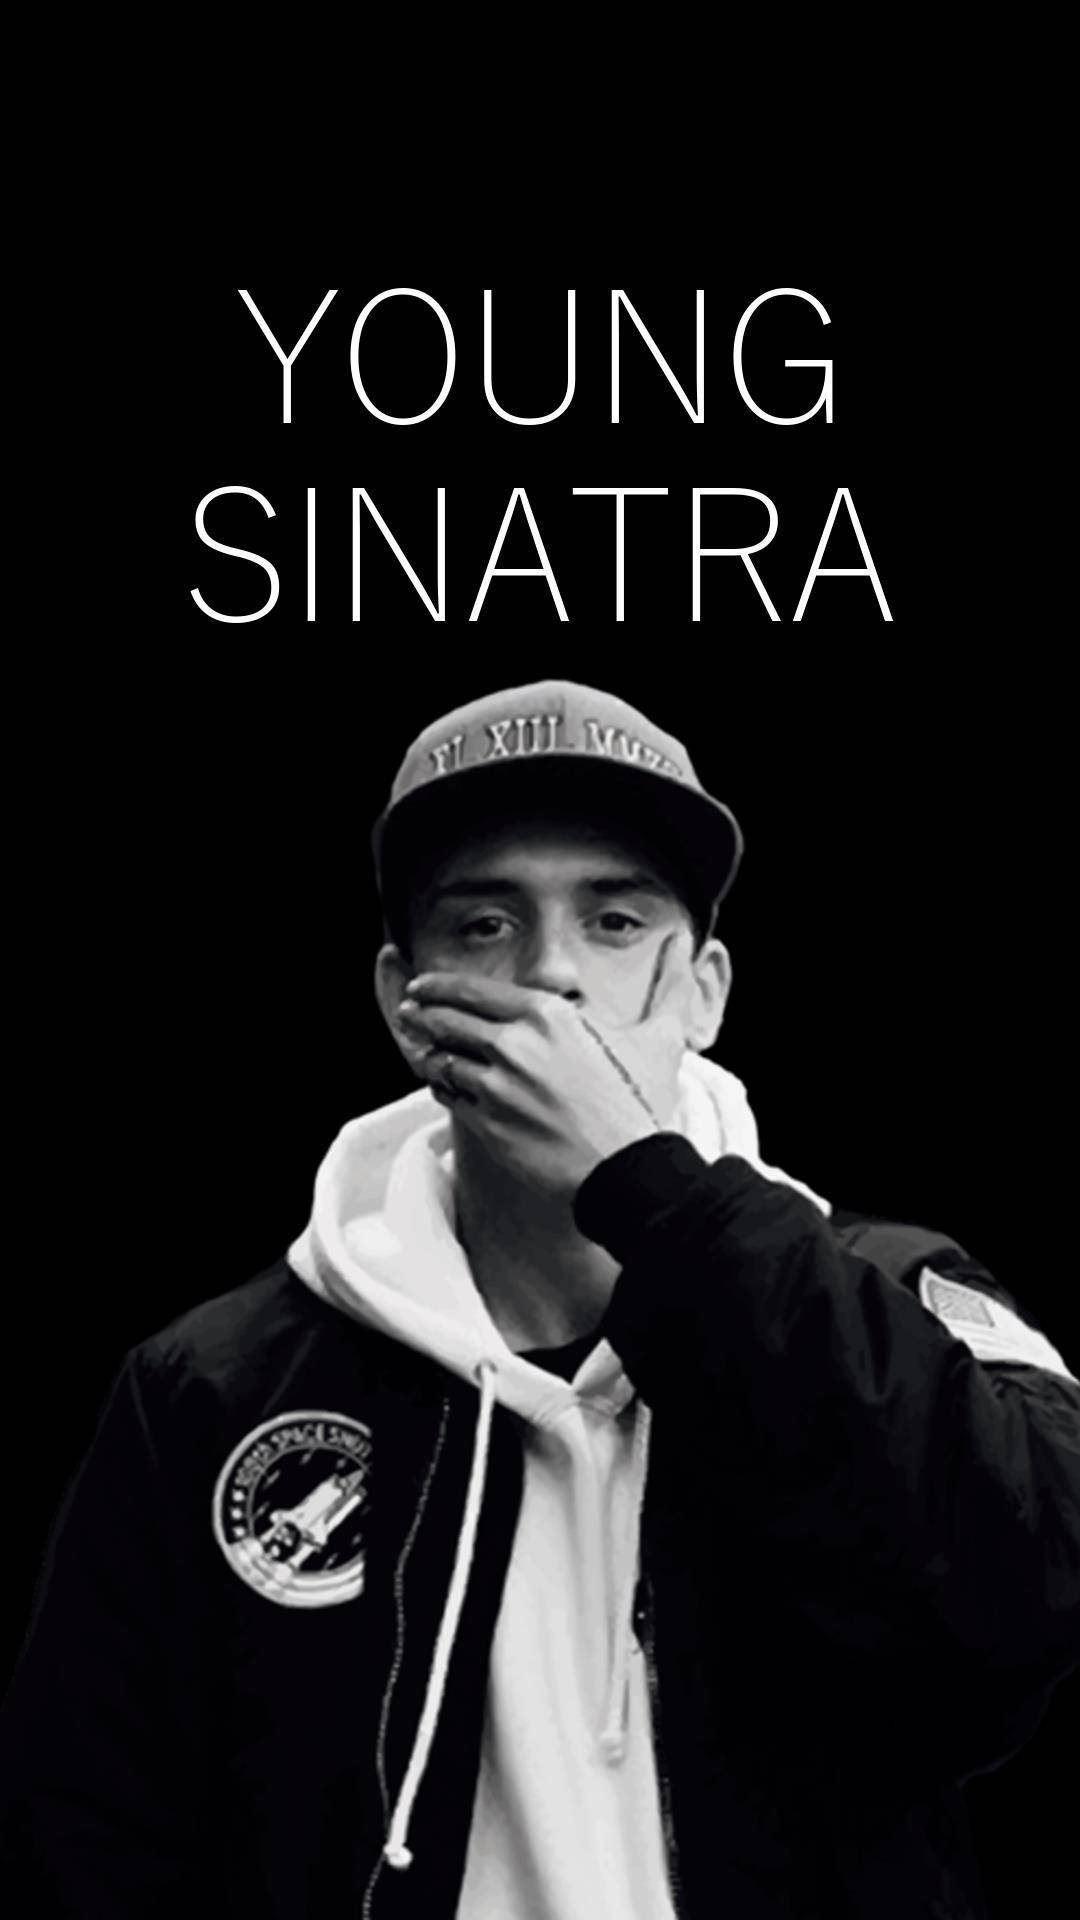 Young Sinatra - A Black And White Poster Wallpaper